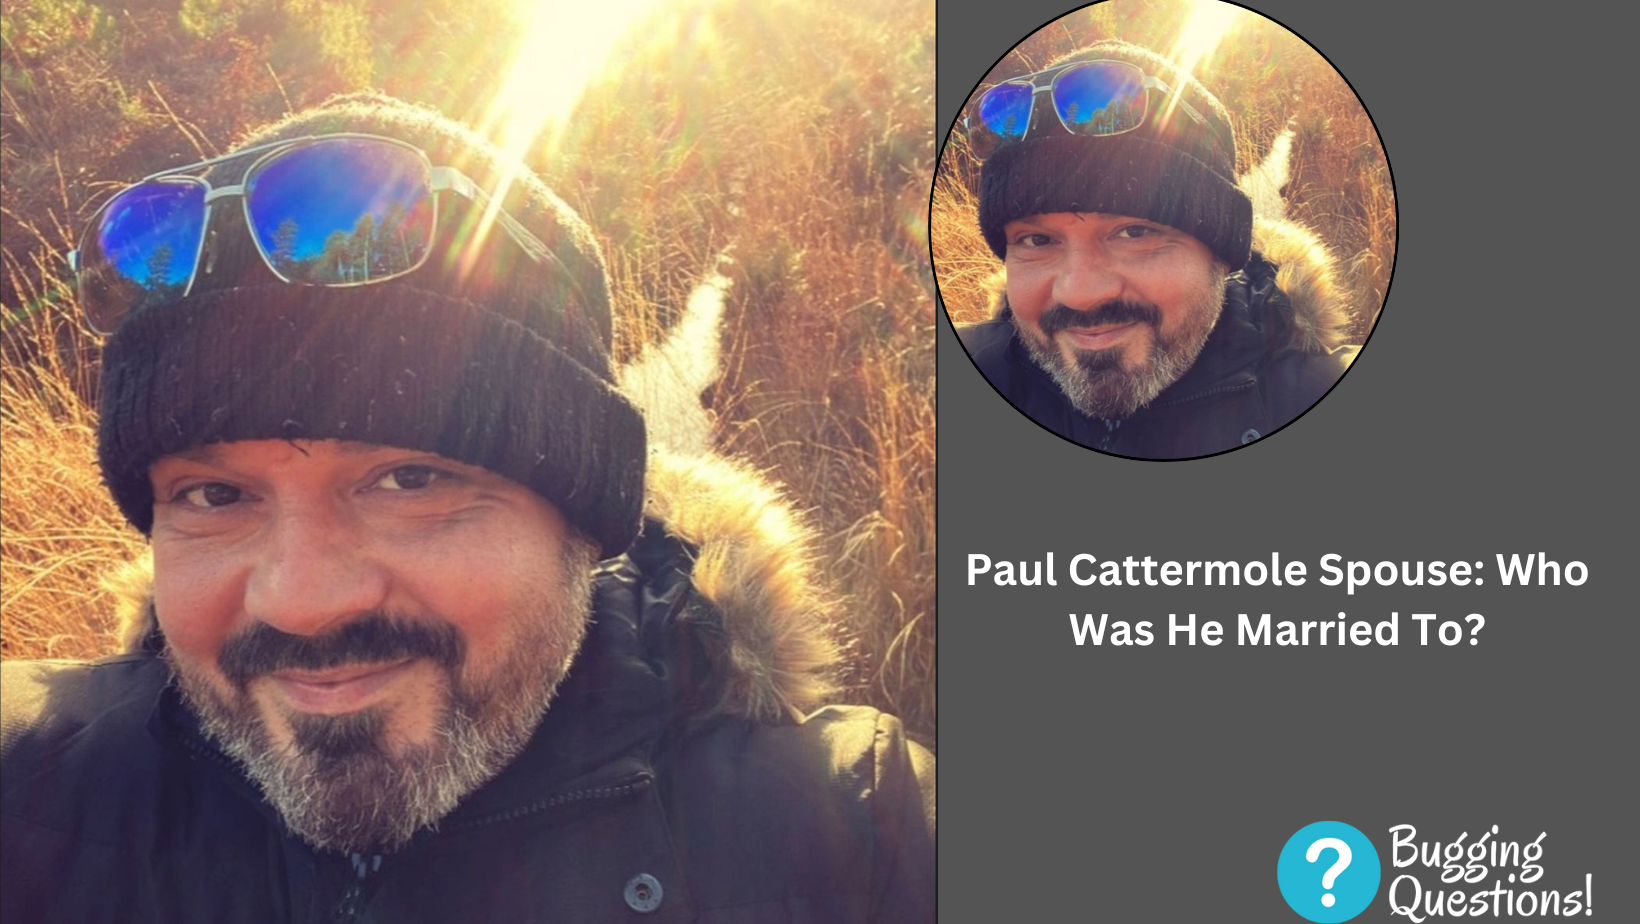 Paul Cattermole Spouse: Who Was He Married To?